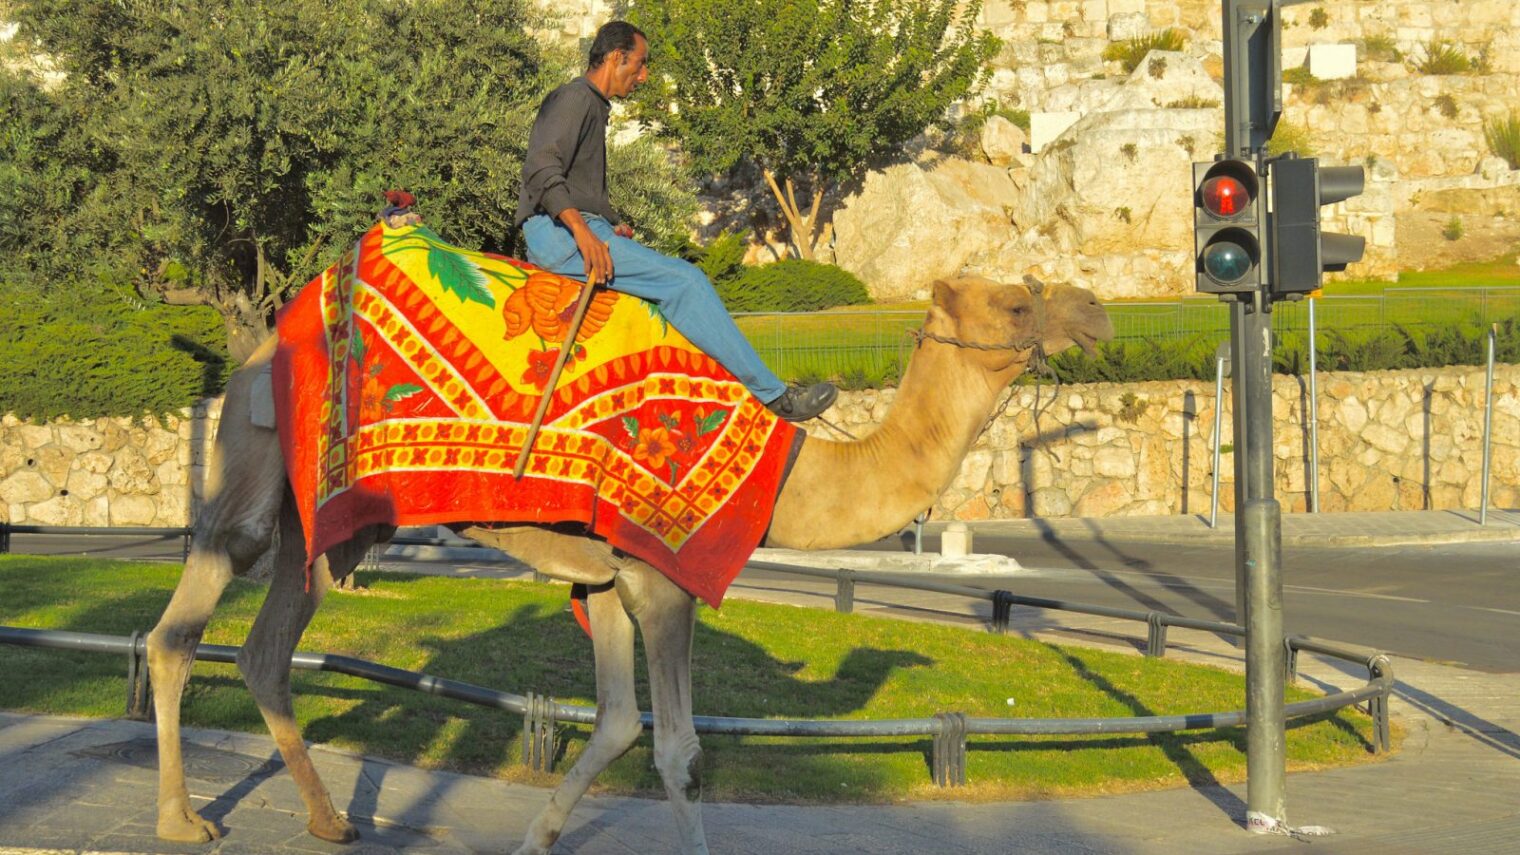 And because yes, we do have camels. A camel in Jerusalem. Photo by Daniel Santacruz